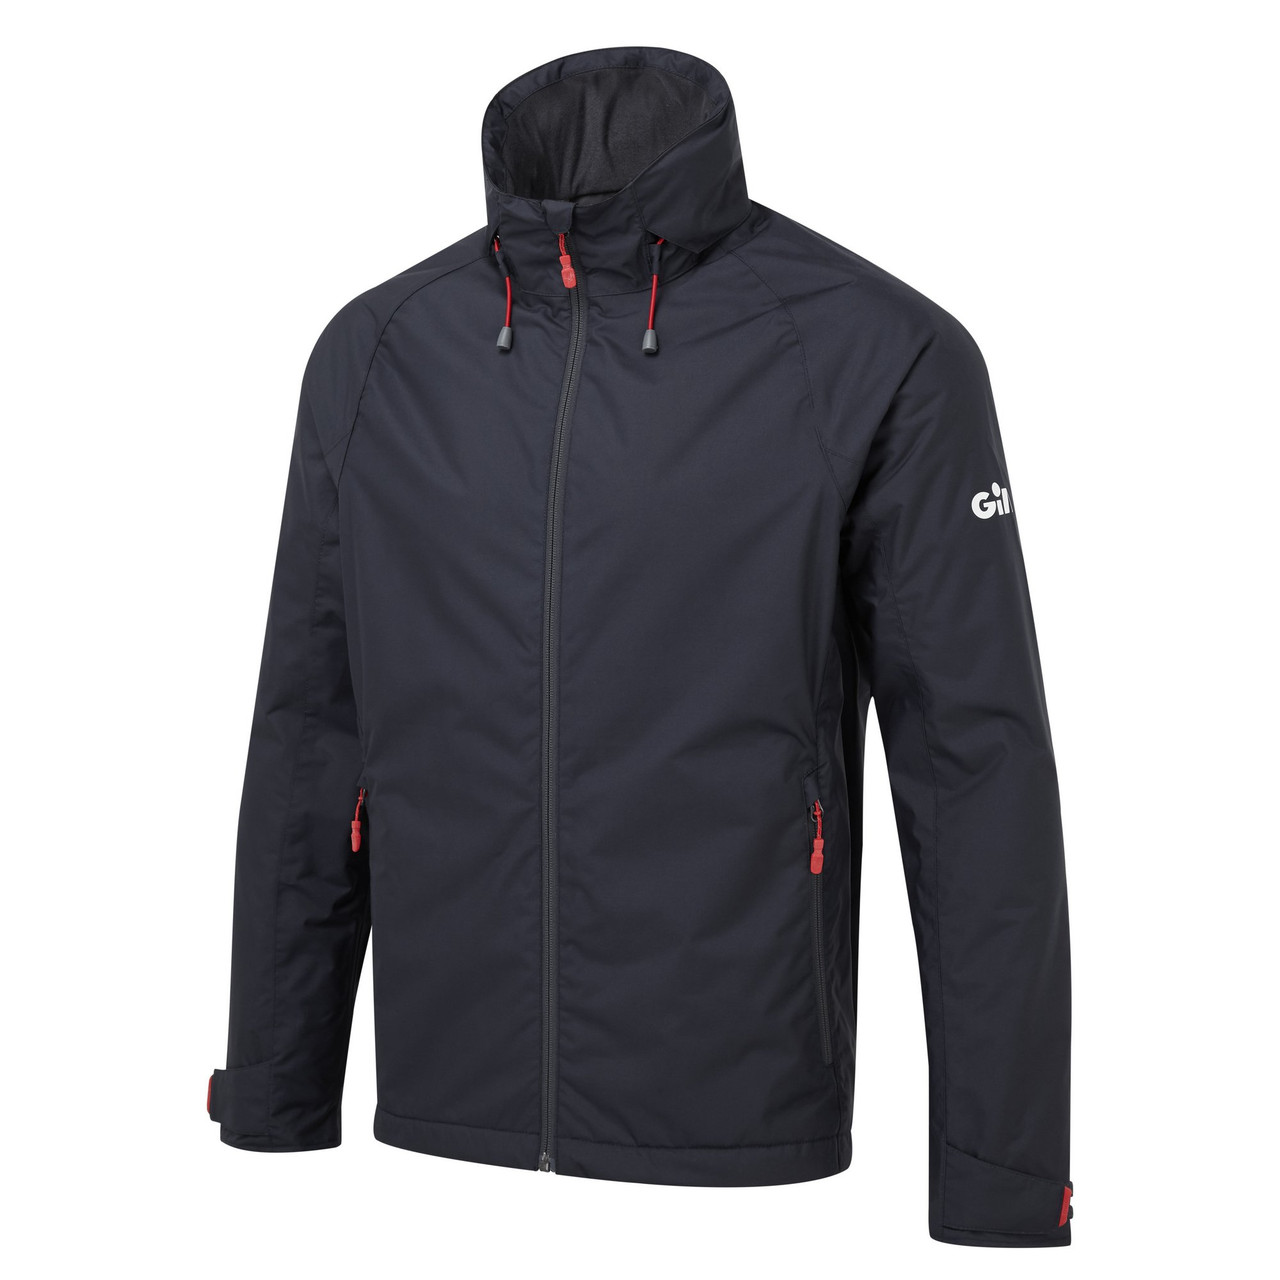 Men’s Hooded Insulated Jacket - Gill Marine